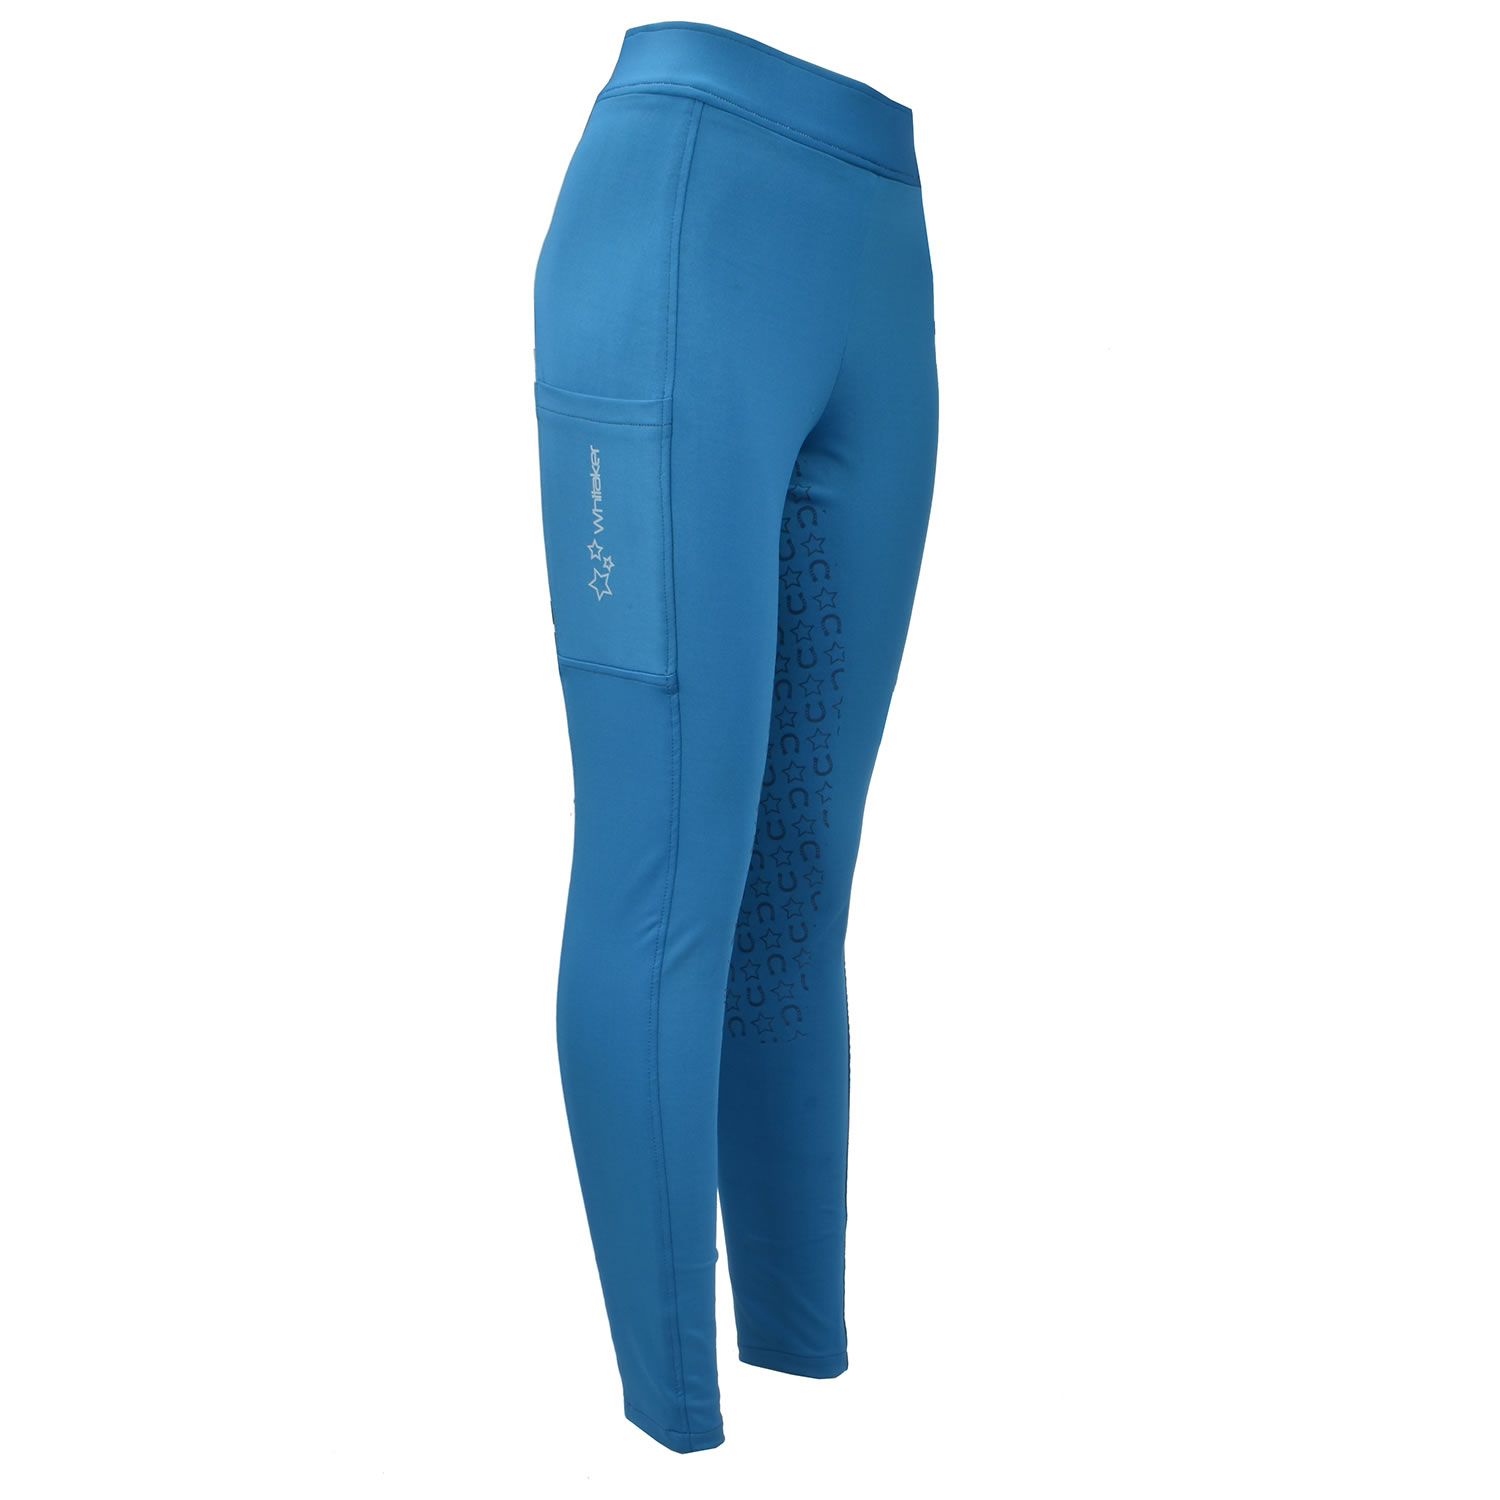 WHITAKER CLITHEROE RIDING TIGHTS CHILD BLUE  AGE 7 - 8 CHILD